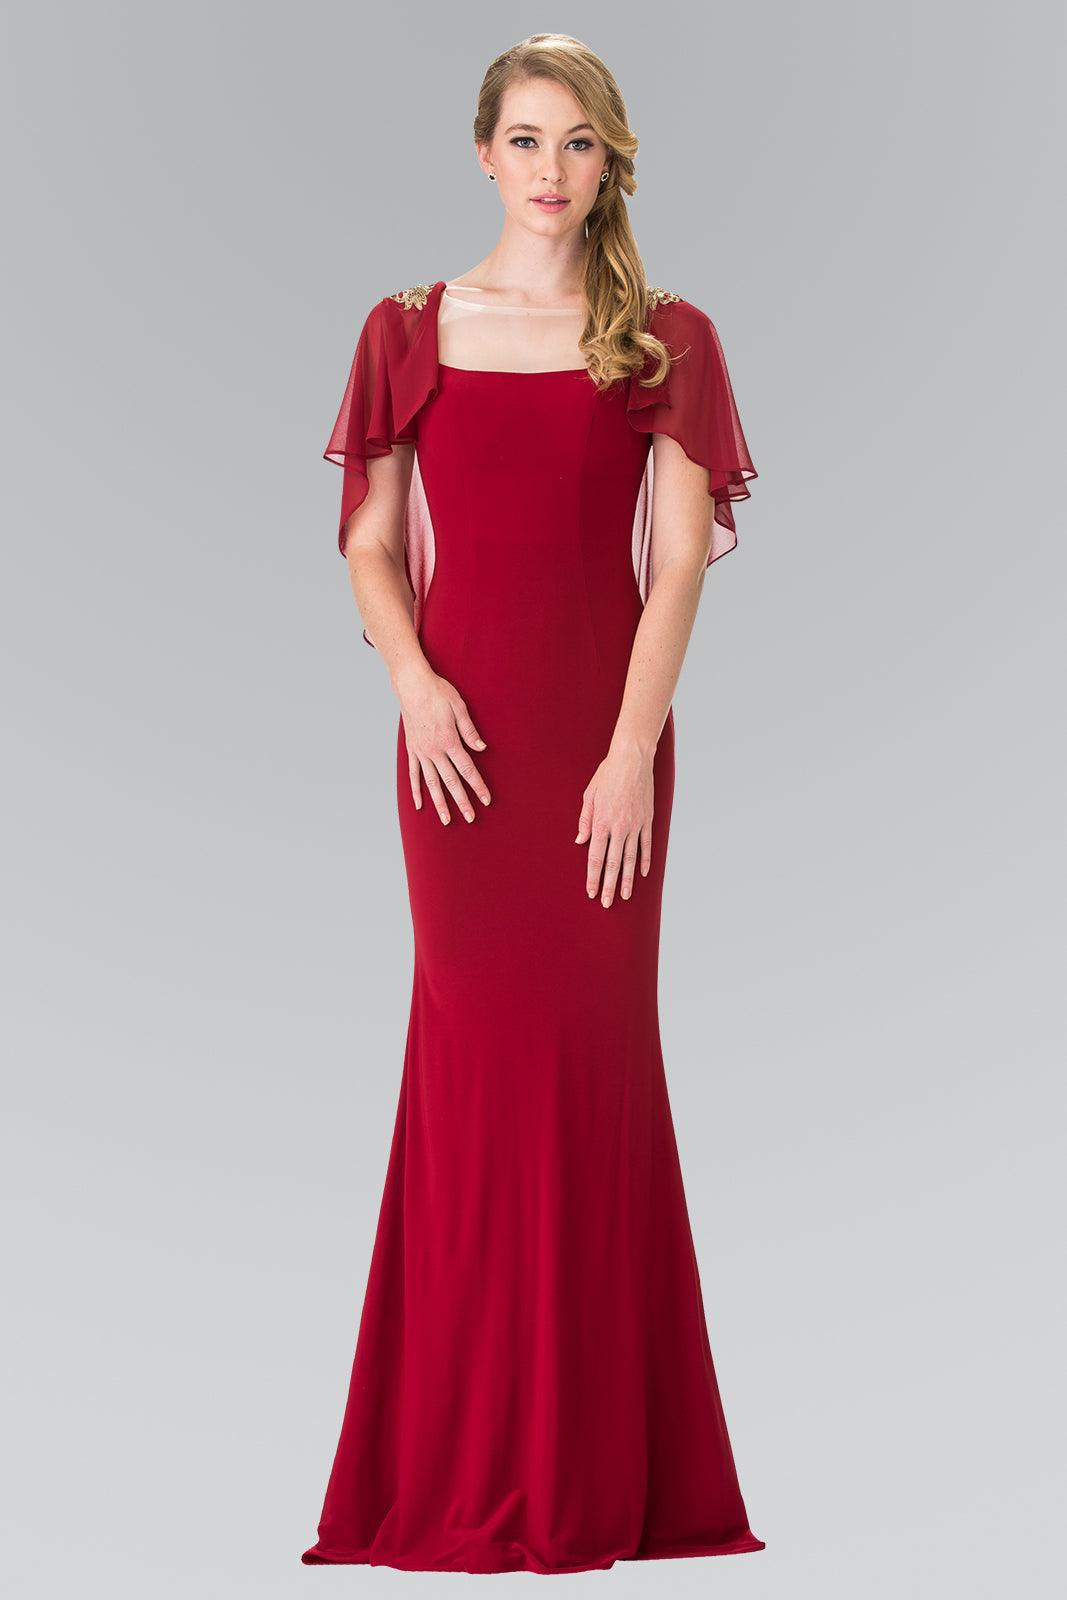 Long Evening Gown Prom Cape Sleeves Dress - The Dress Outlet Elizabeth K